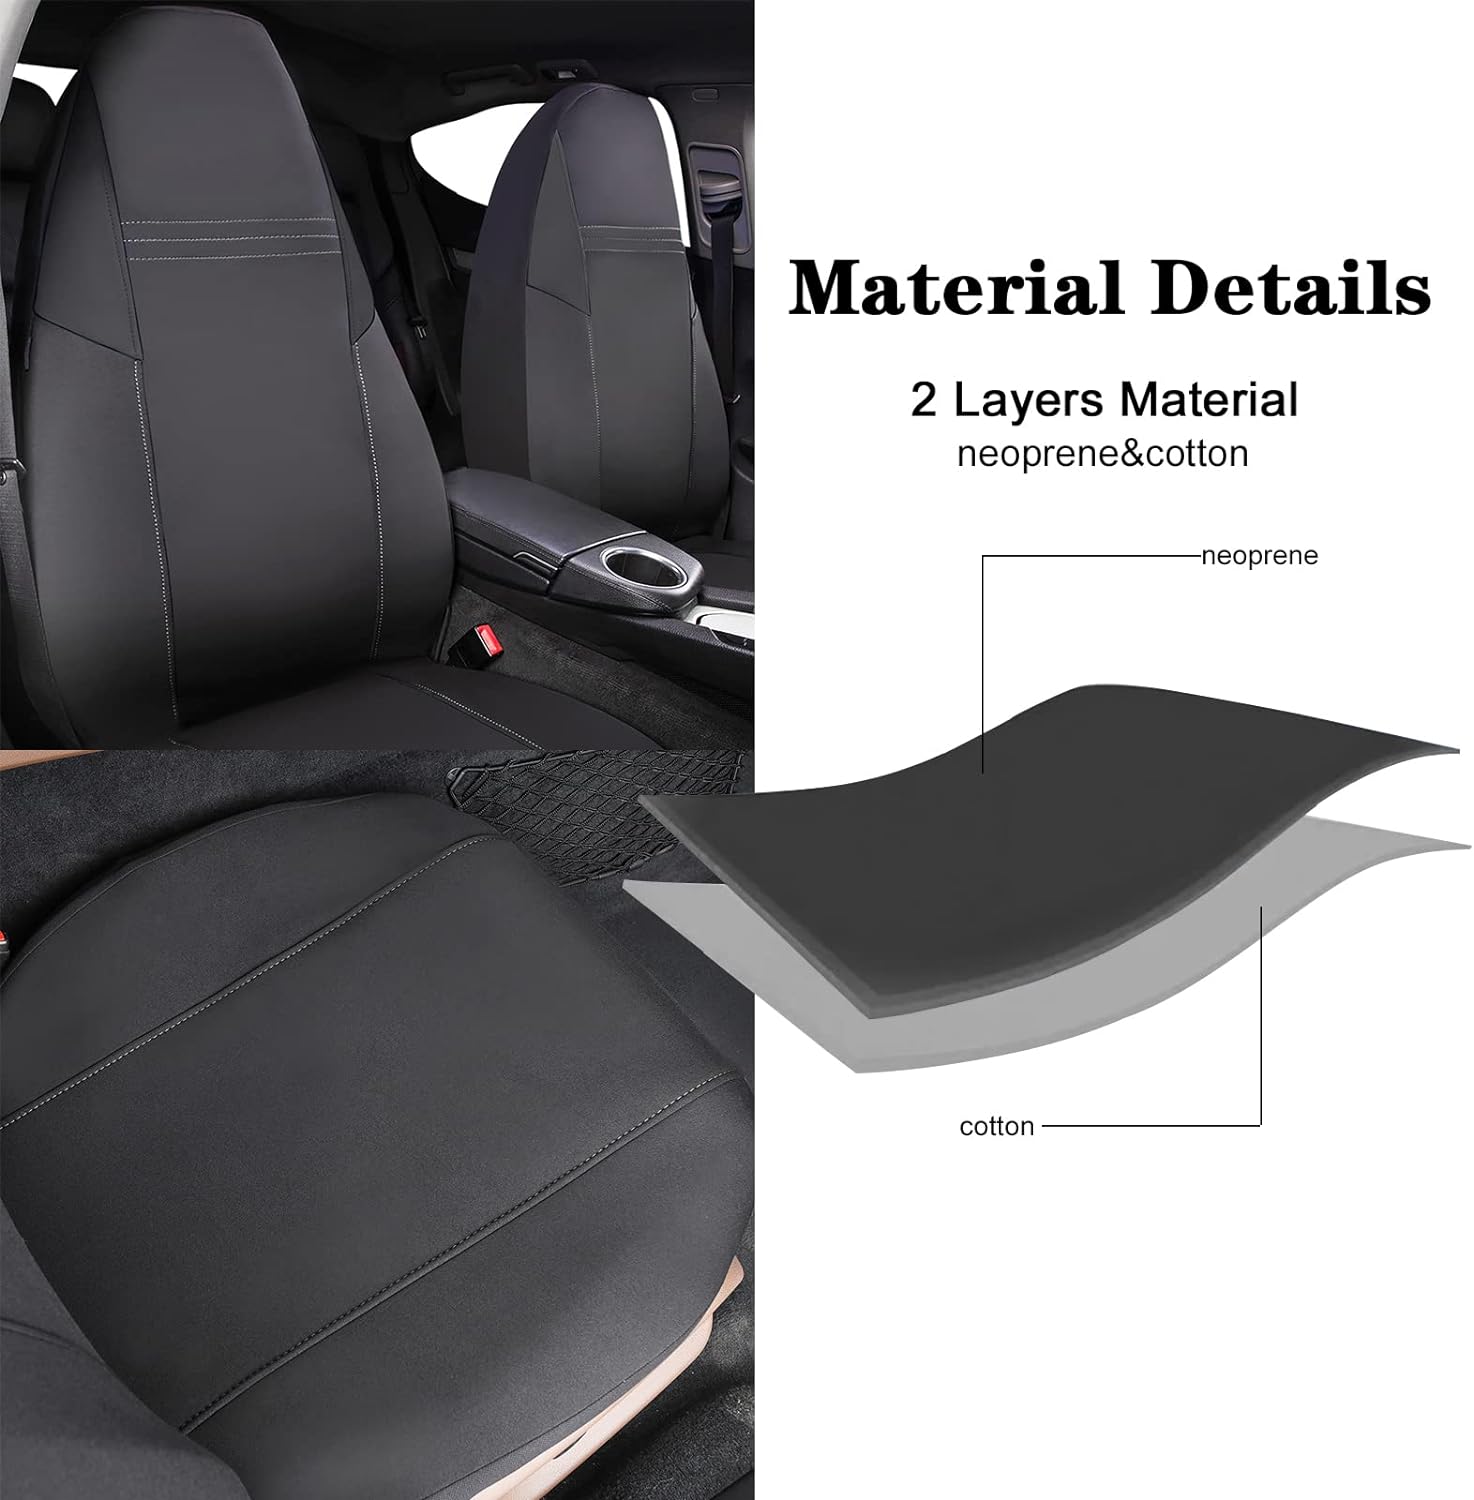 CAR PASS Waterproof Car Seat Covers Full Sets with 5mm Composite EVA, Neoprene Car Seat Cover with Separate Headrest Covers, Quick Setup Universal Fit SUV Trucks Automotive,Airbag Compatible(Gray)